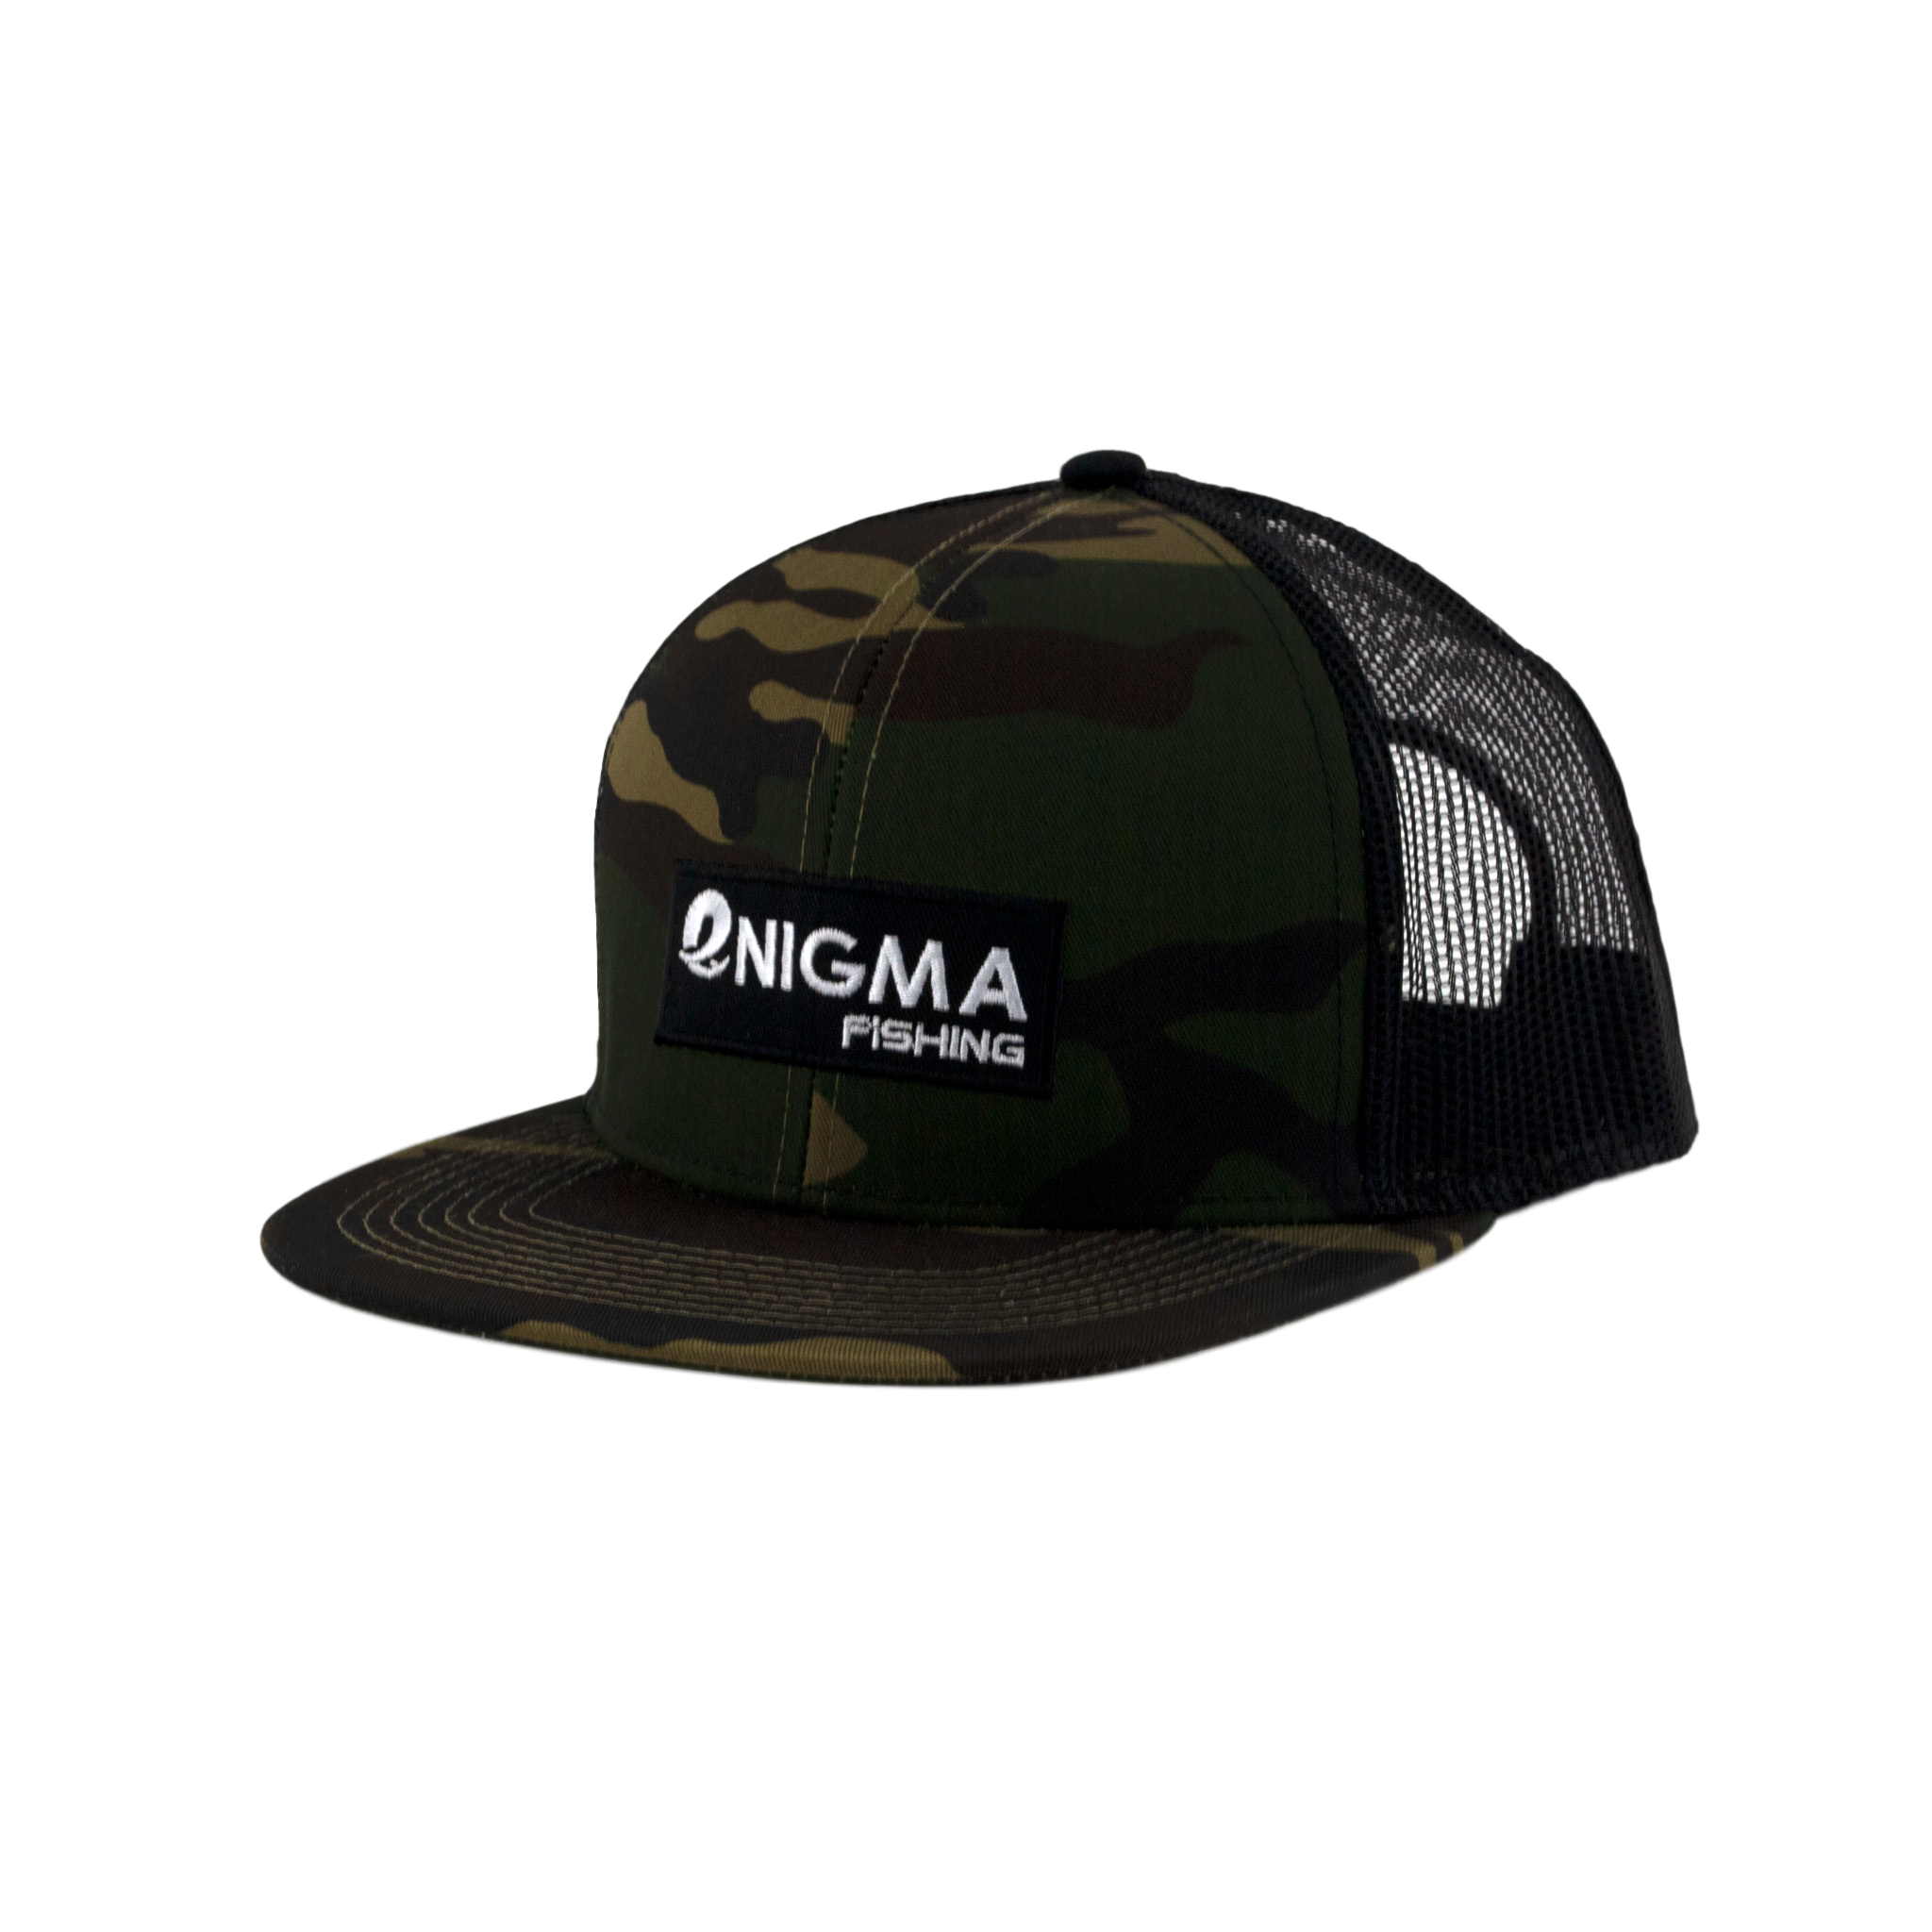 Enigma Fishing Patch Camo Snapback Hat